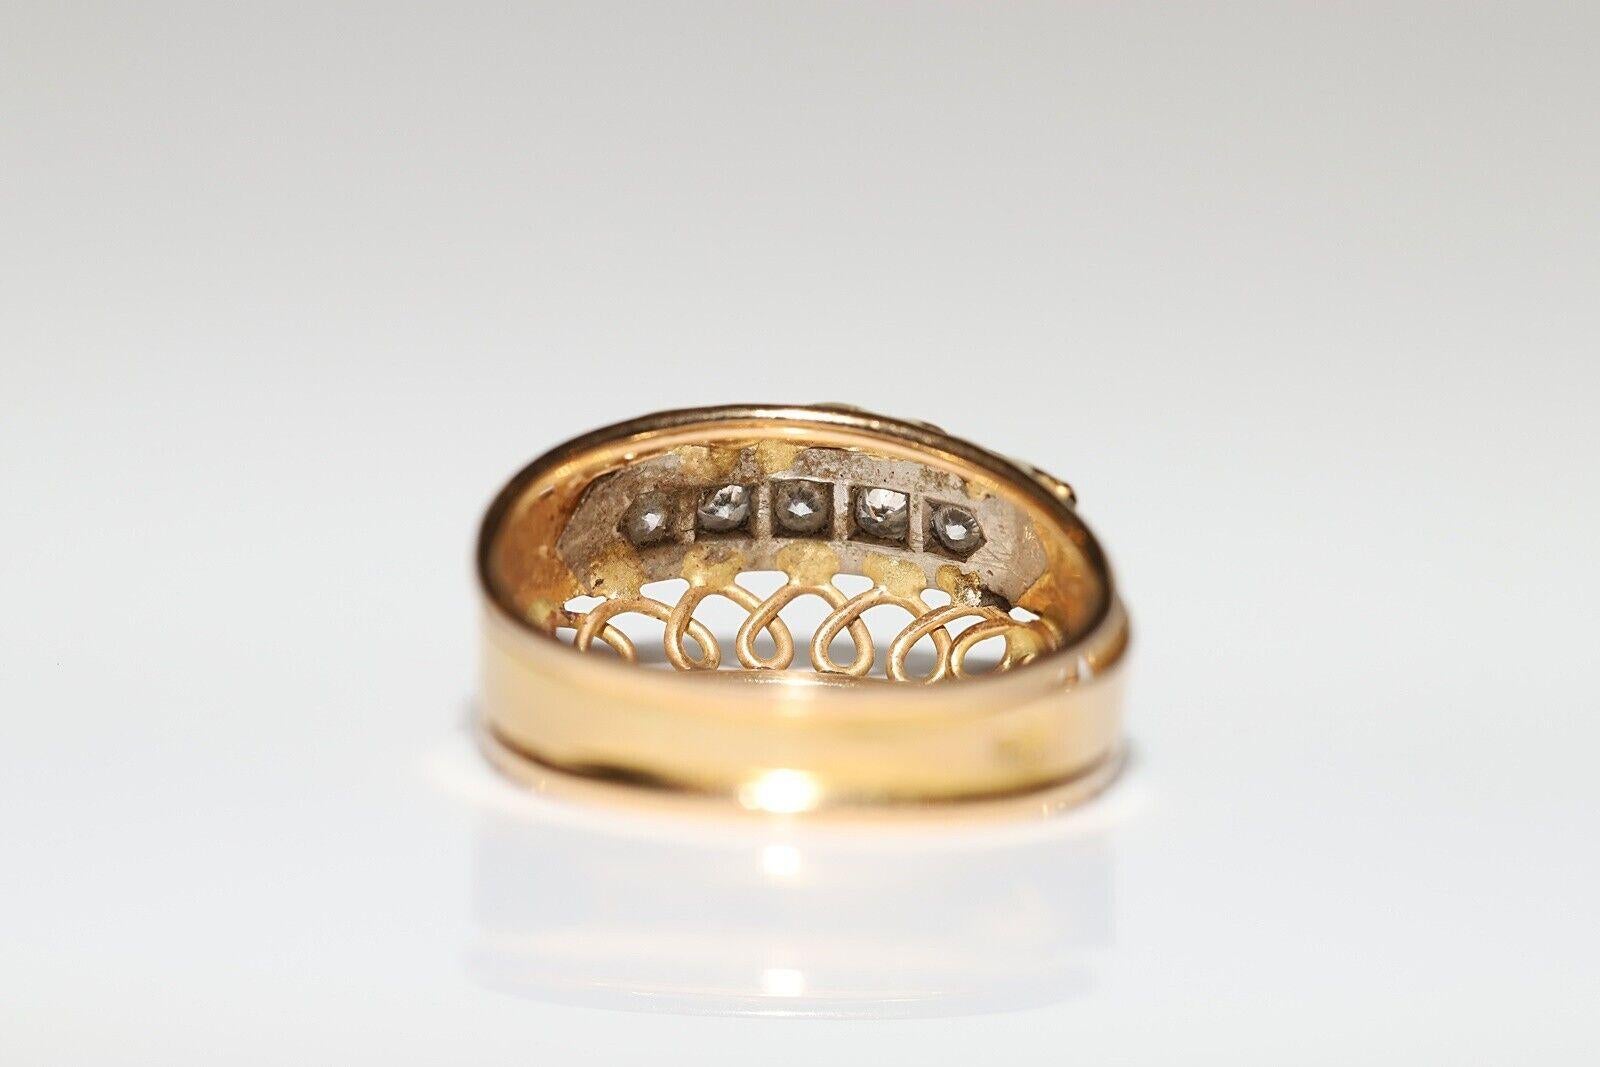 Antique Circa 1900s 18k Gold Natural Diamond Decorated Band Ring In Good Condition For Sale In Fatih/İstanbul, 34